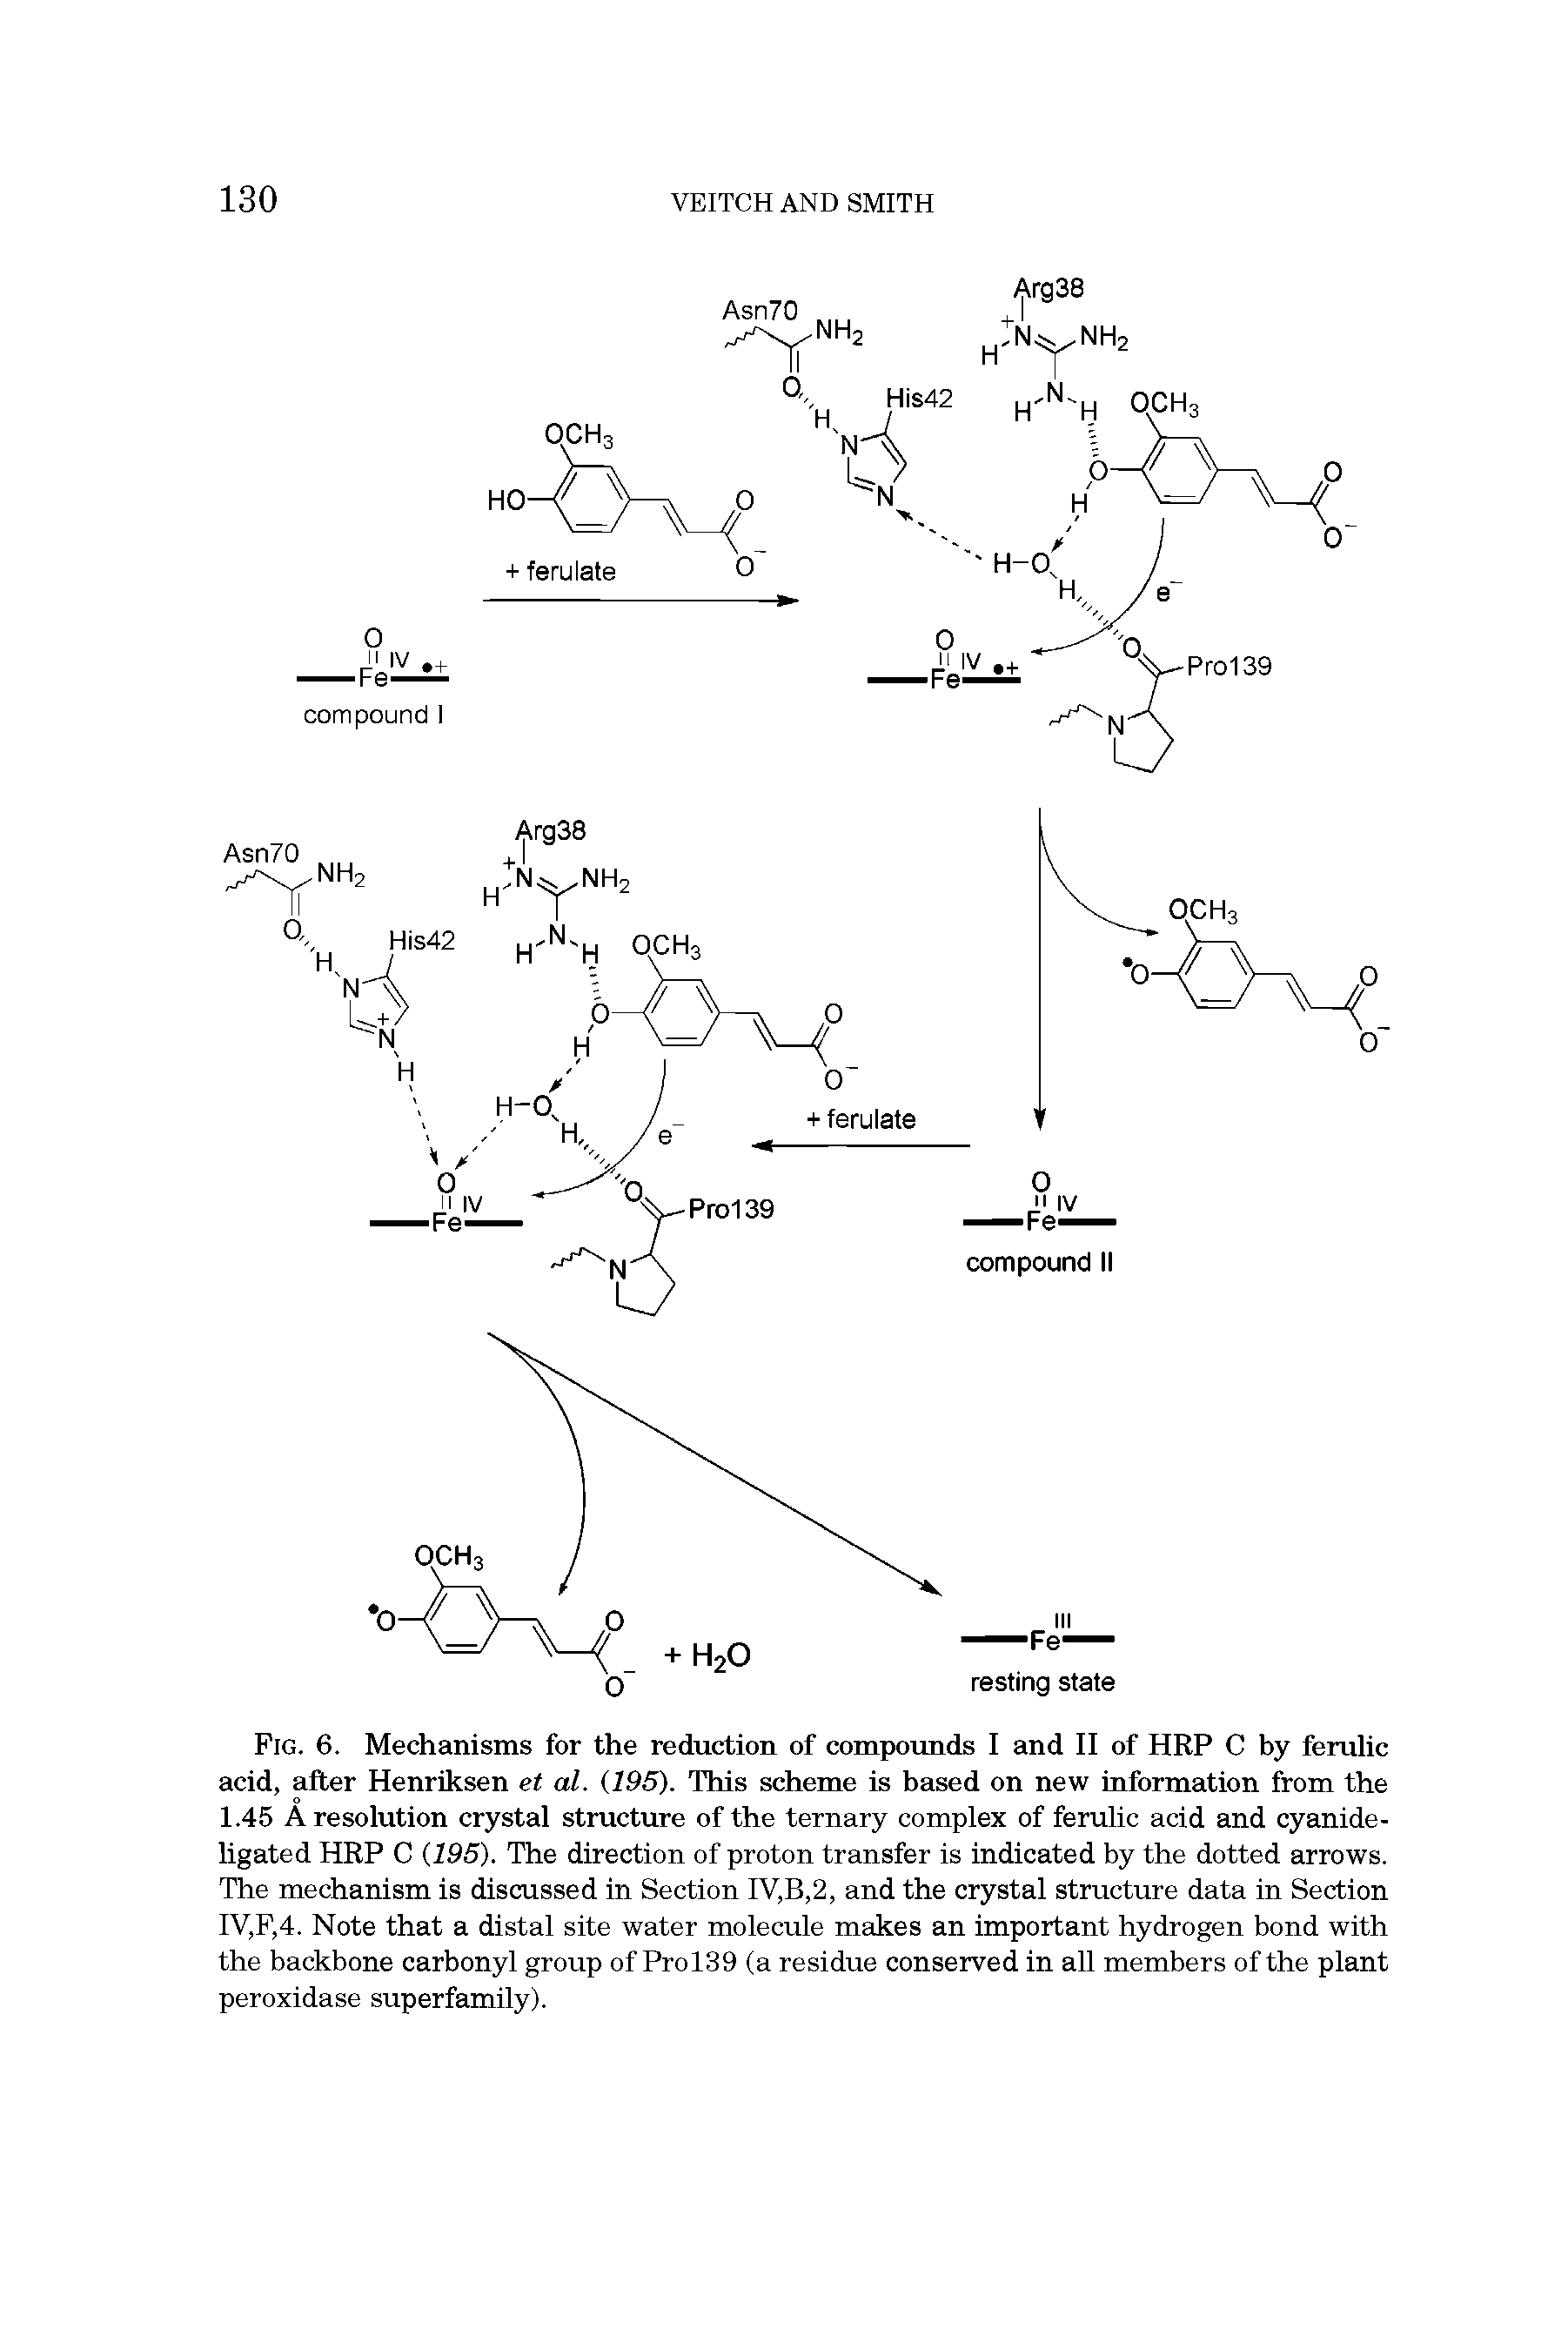 Fig. 6. Mechanisms for the reduction of compounds I and II of HRP C by ferulic acid, after Henriksen et al. 195). This scheme is based on new information from the 1.45 A resolution crystal structure of the ternary complex of ferulic acid and cyanide-ligated HRP C 195). The direction of proton transfer is indicated by the dotted arrows. The mechanism is discussed in Section IV,B,2, and the crystal structure data in Section IV,F,4. Note that a distal site water molecule makes an important hydrogen bond with the backbone carbonyl group of Prol39 (a residue conserved in all members of the plant peroxidase superfamily).